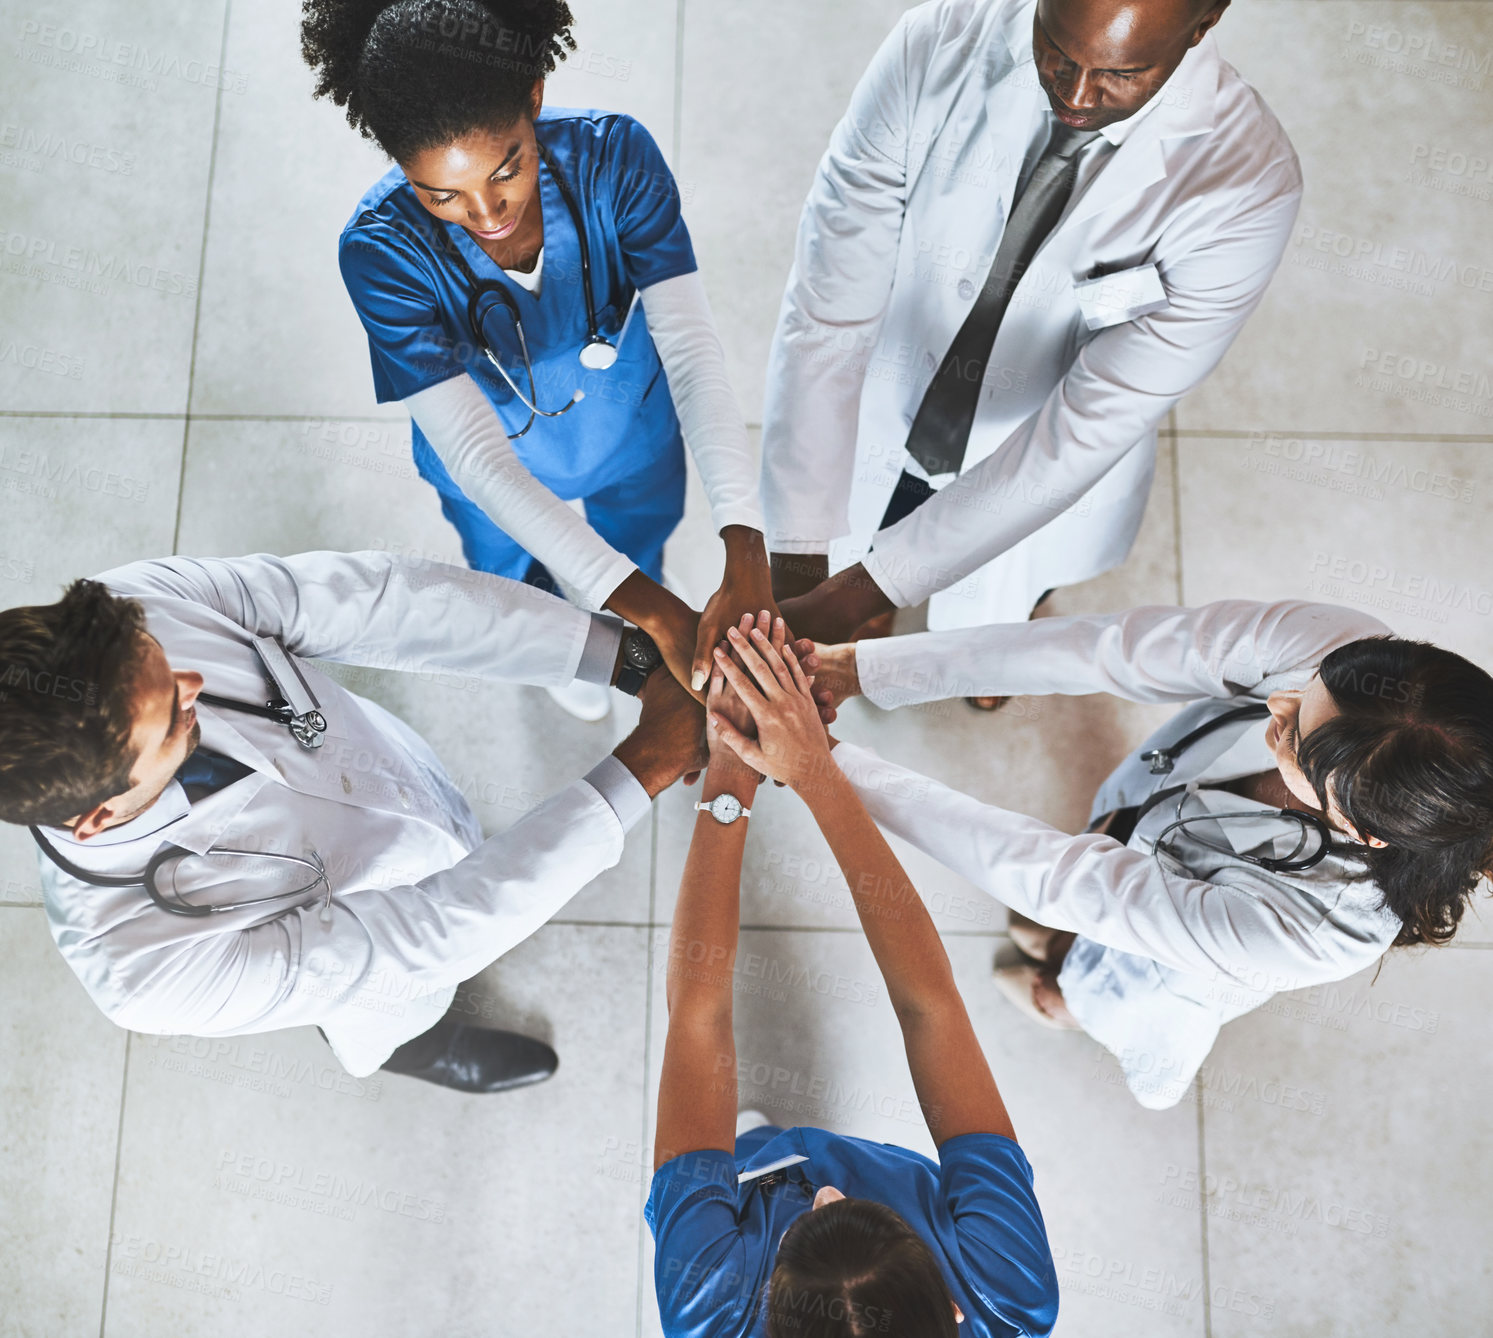 Buy stock photo High angle shot of a diverse team of doctors joining their hands together in a hospital